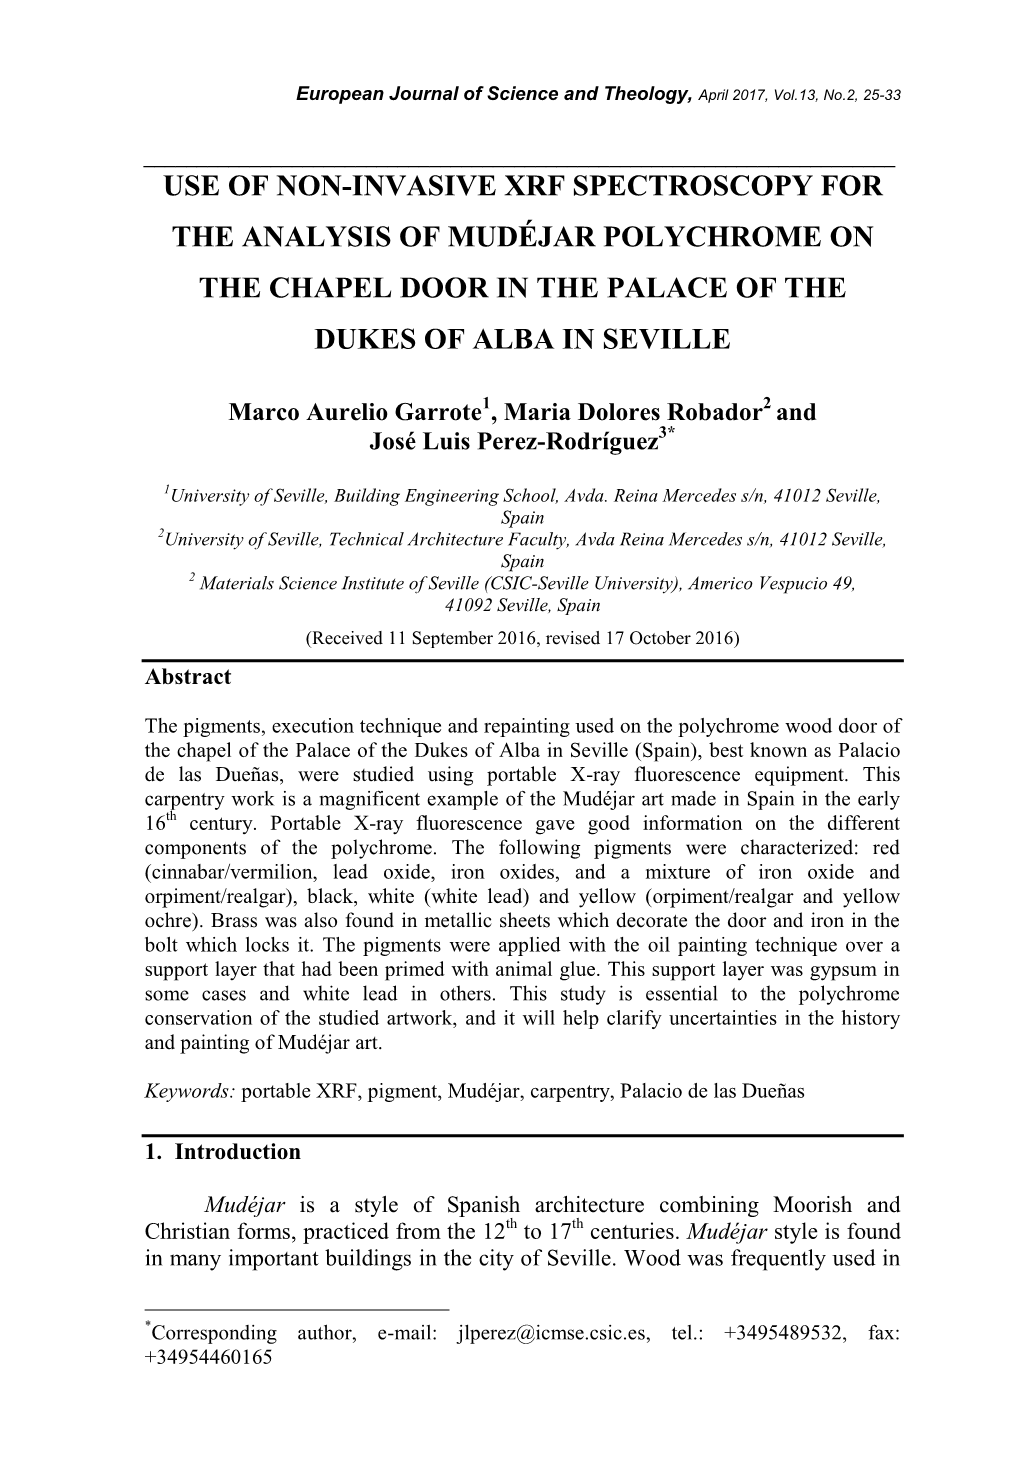 Use of Non-Invasive Xrf Spectroscopy for the Analysis of Mudéjar Polychrome on the Chapel Door in the Palace of the Dukes of Alba in Seville